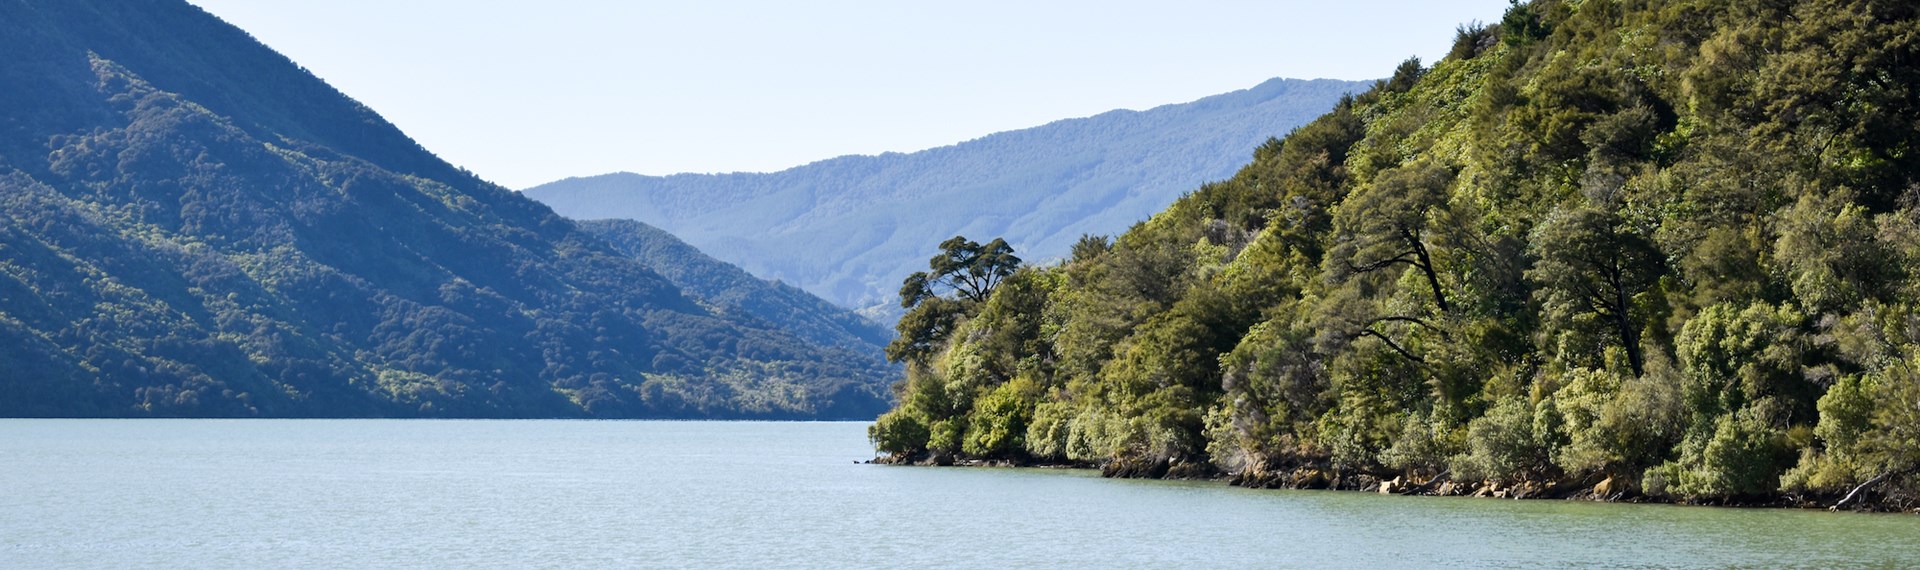 Bush covered hill and bay seen from onboard the Pelorus Mail Boat.